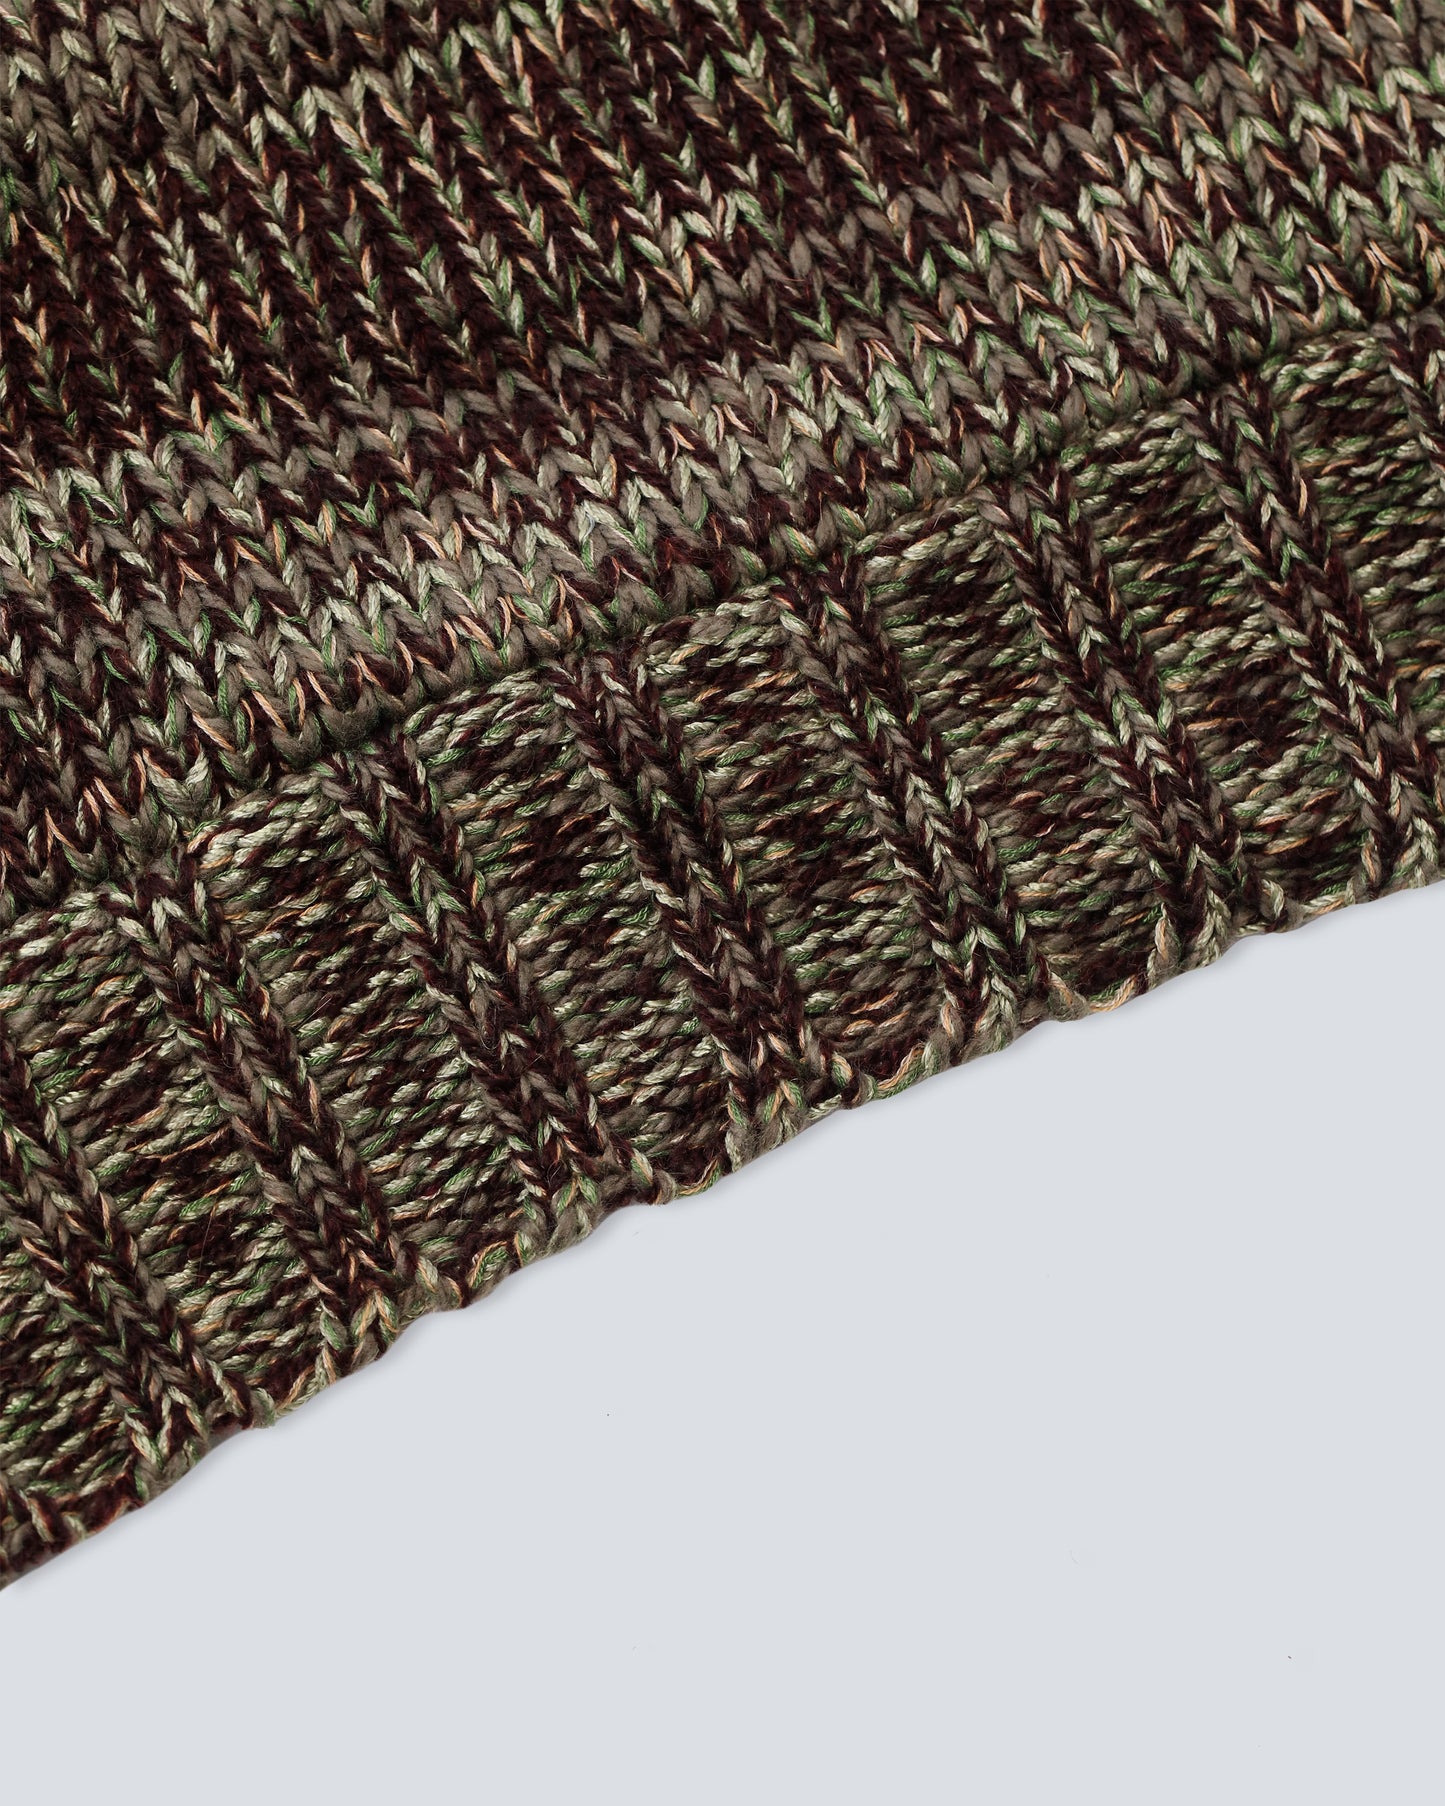 Olive Hand-Loomed Knitted Hoodie